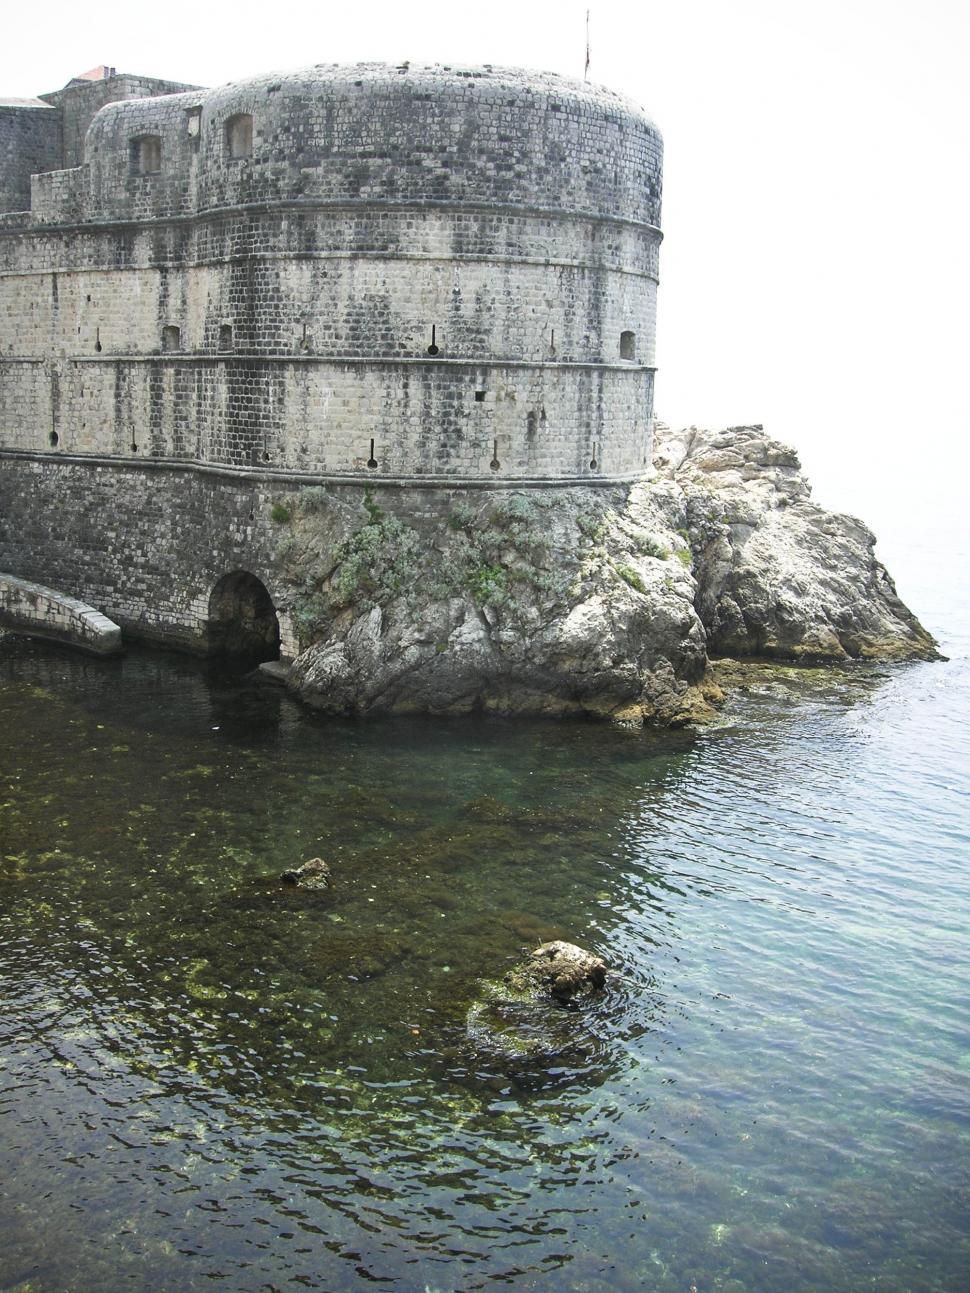 Free Image of Dubrovnik City Wall 